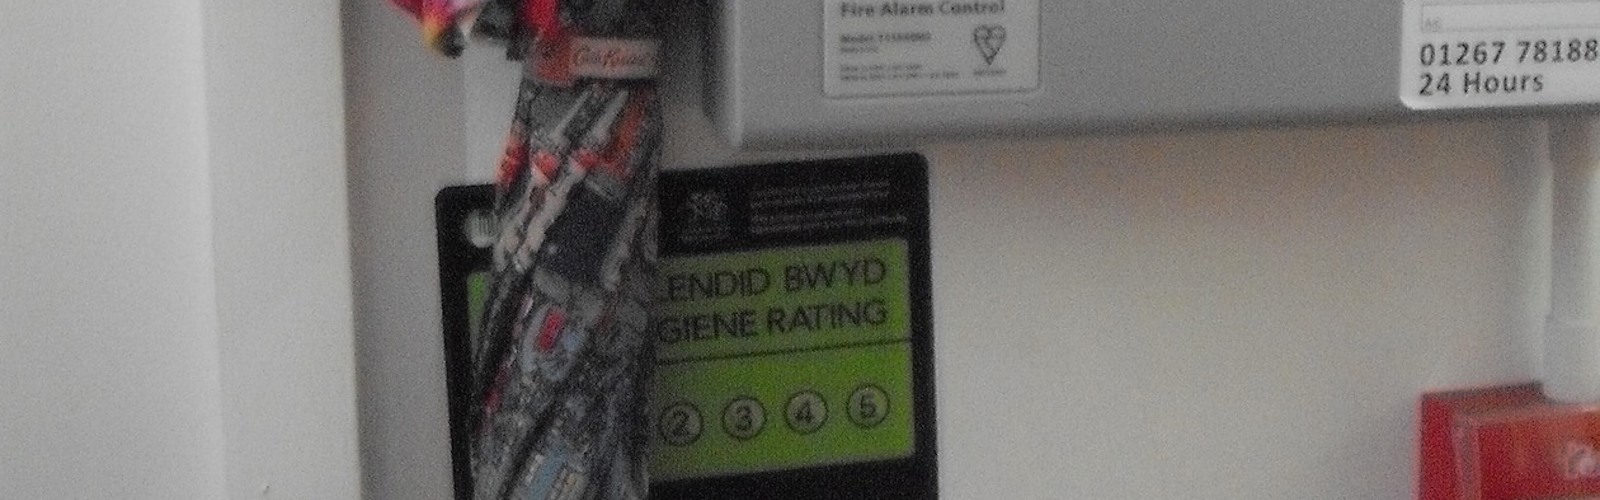 JT3's food hygiene rating sticker, creatively displayed